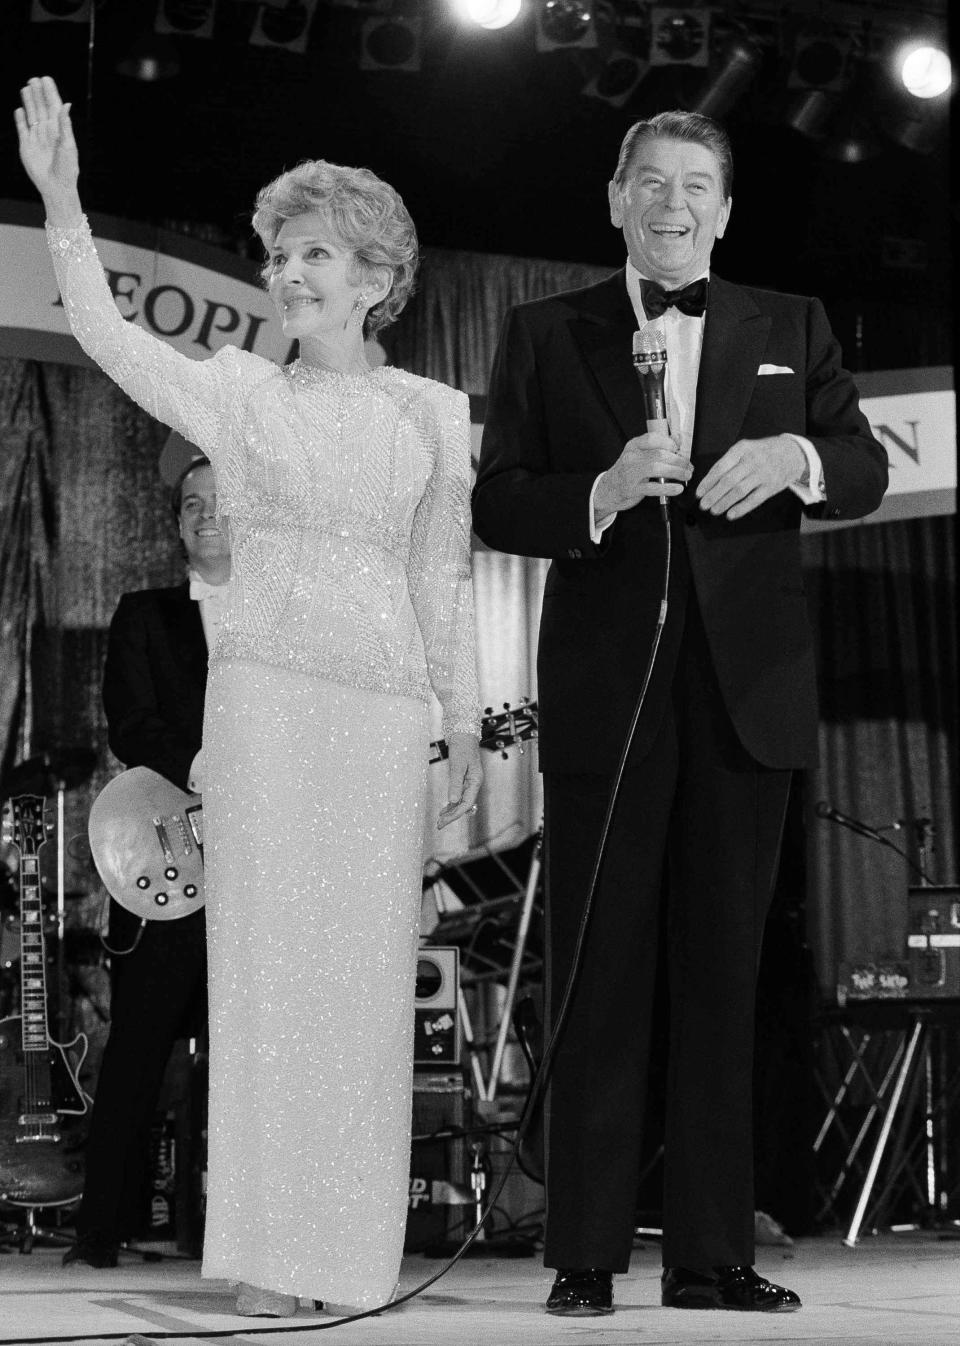 President Ronald Reagan smiles as first lady Nancy Reagan waves to guests at the Ball for Young Americans at the D.C. Armory in Washington, Jan. 21, 1985. President Reagan re-enacted his oath of office earlier in the day in the rotunda of the Capitol. (AP Photo/Ira Schwarz)